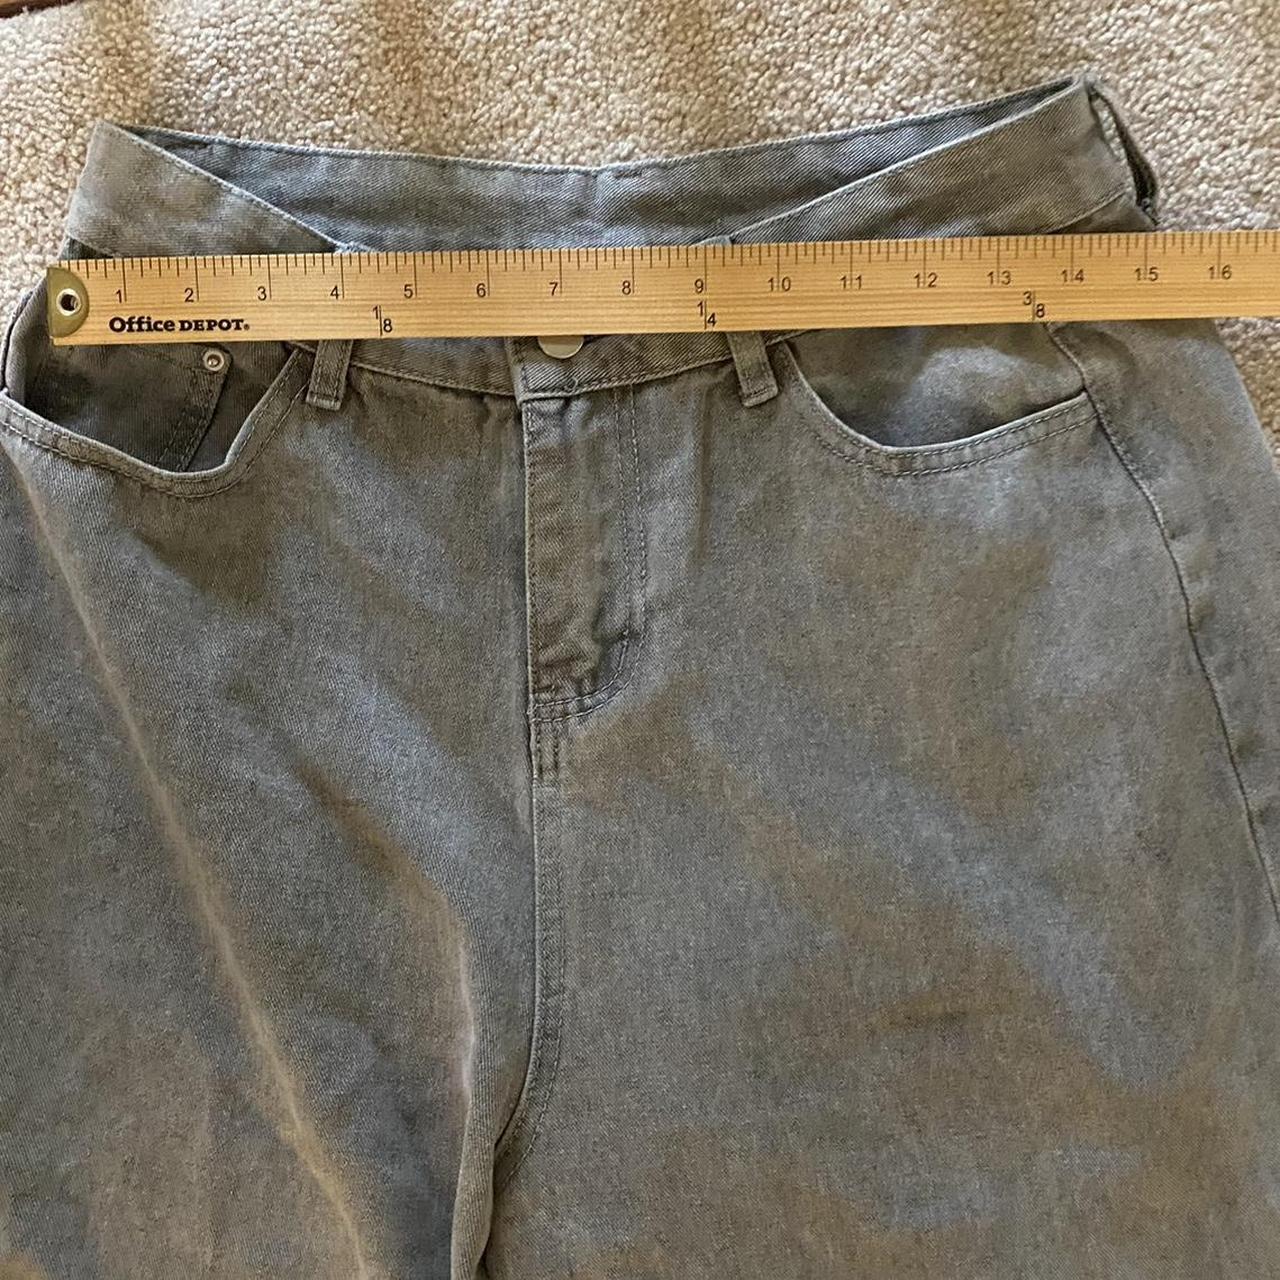 Jnco like extremely baggy jeans Size (waist is... - Depop